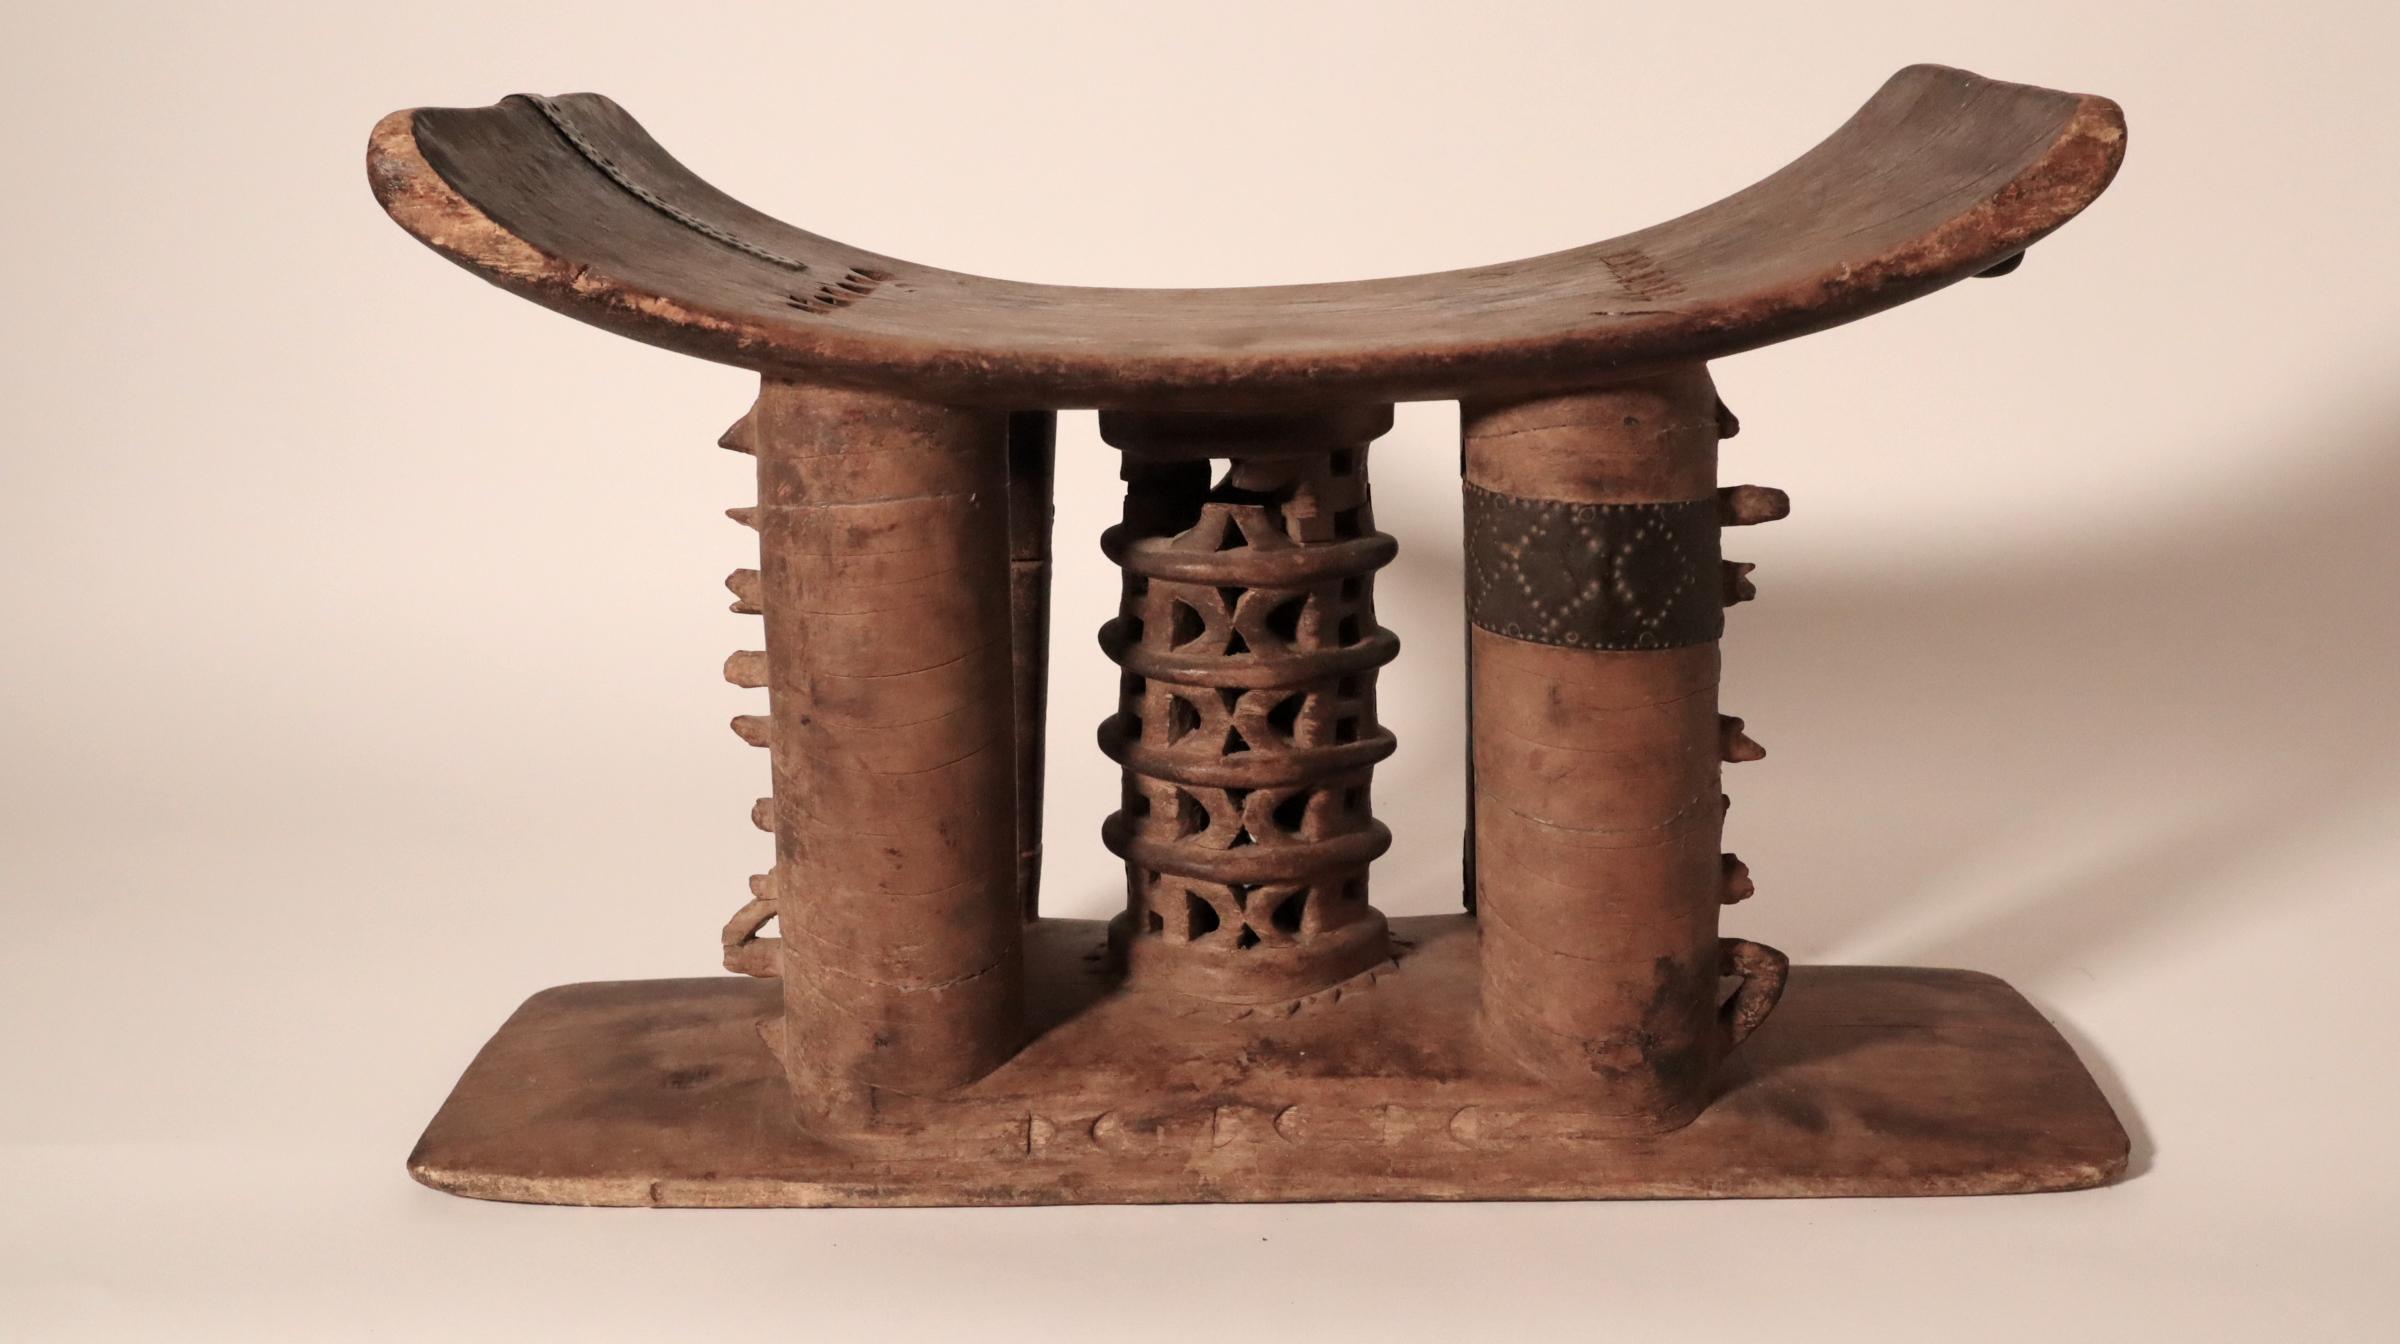 The stool was loved by its owner, repaired in several places with decorated metal straps. It has an openwork, tiered lattice central post and four support posts. It has the older style tiered square cut out and wide cross hollow on the underside